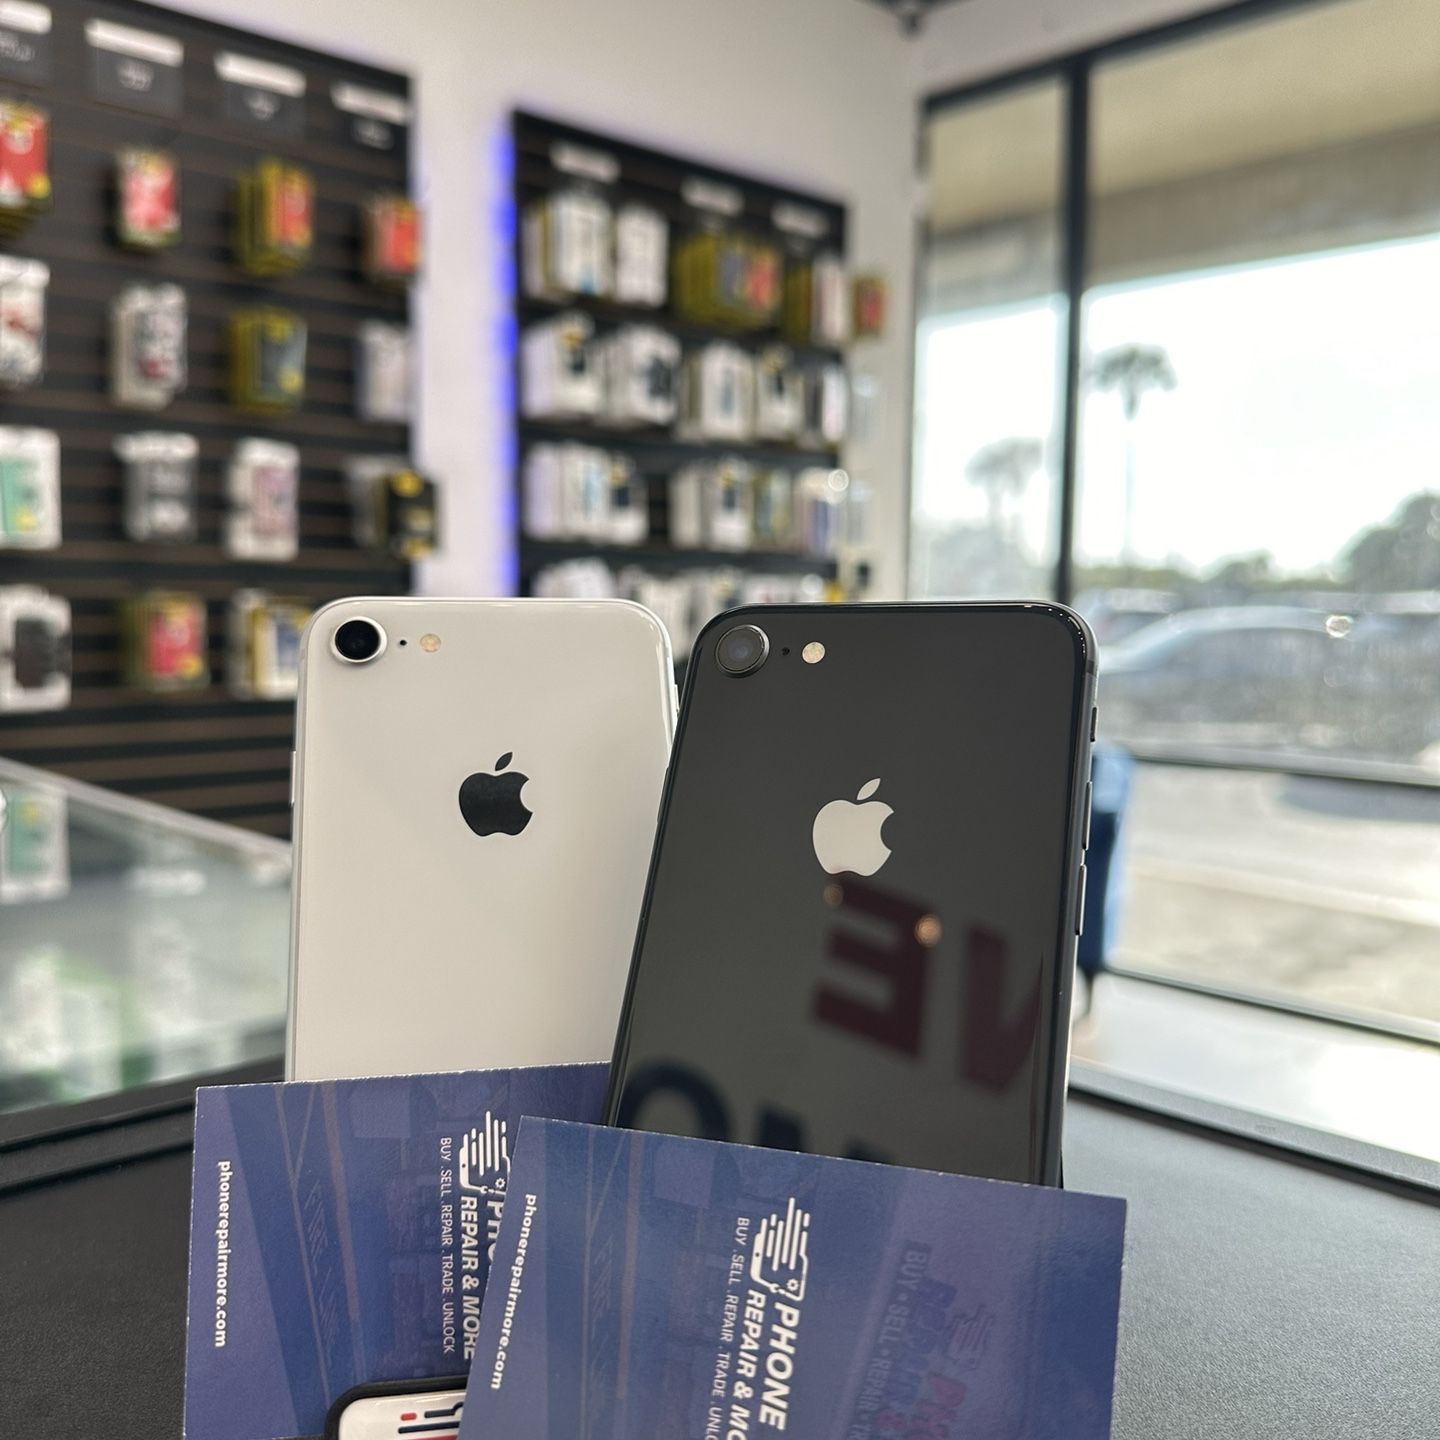 iPhone XR Unlocked for any carrier 🔓| Up to 90 Days warranty✅ | All colors Available ❗️| Like New 